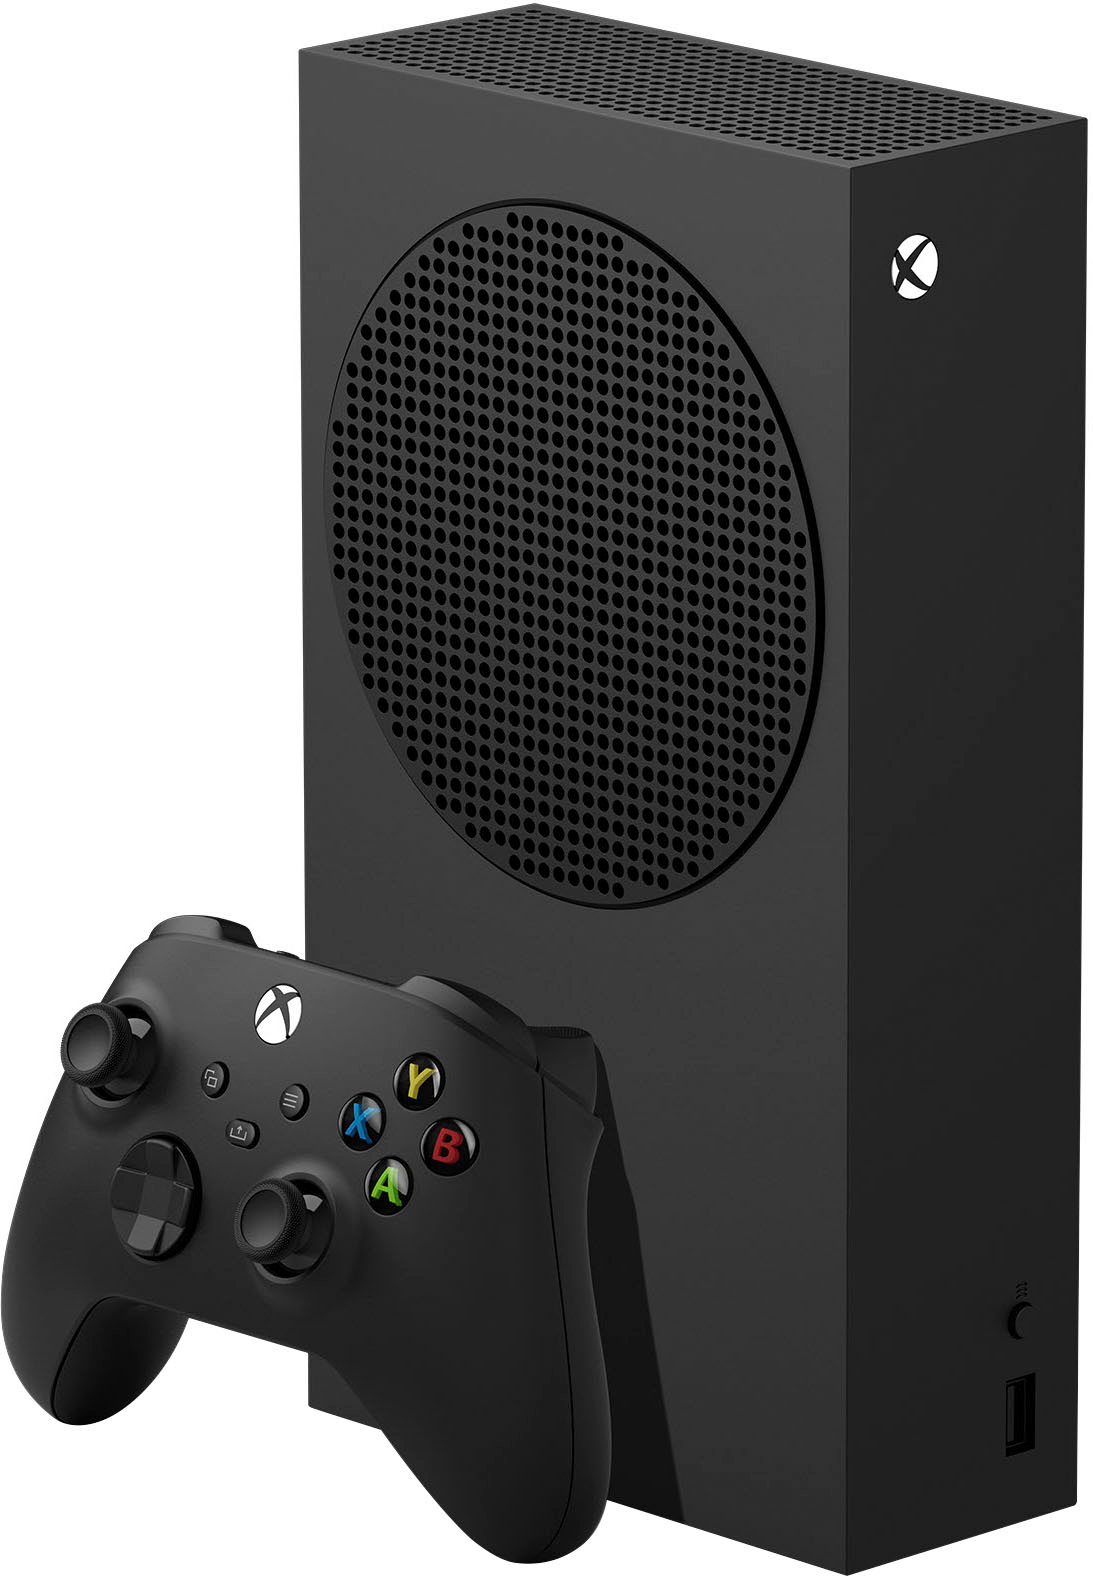 Commercial handling Offer Microsoft Xbox Series S 1TB All-Digital Console (Disc-Free Gaming) Black  XXU-00001 - Best Buy